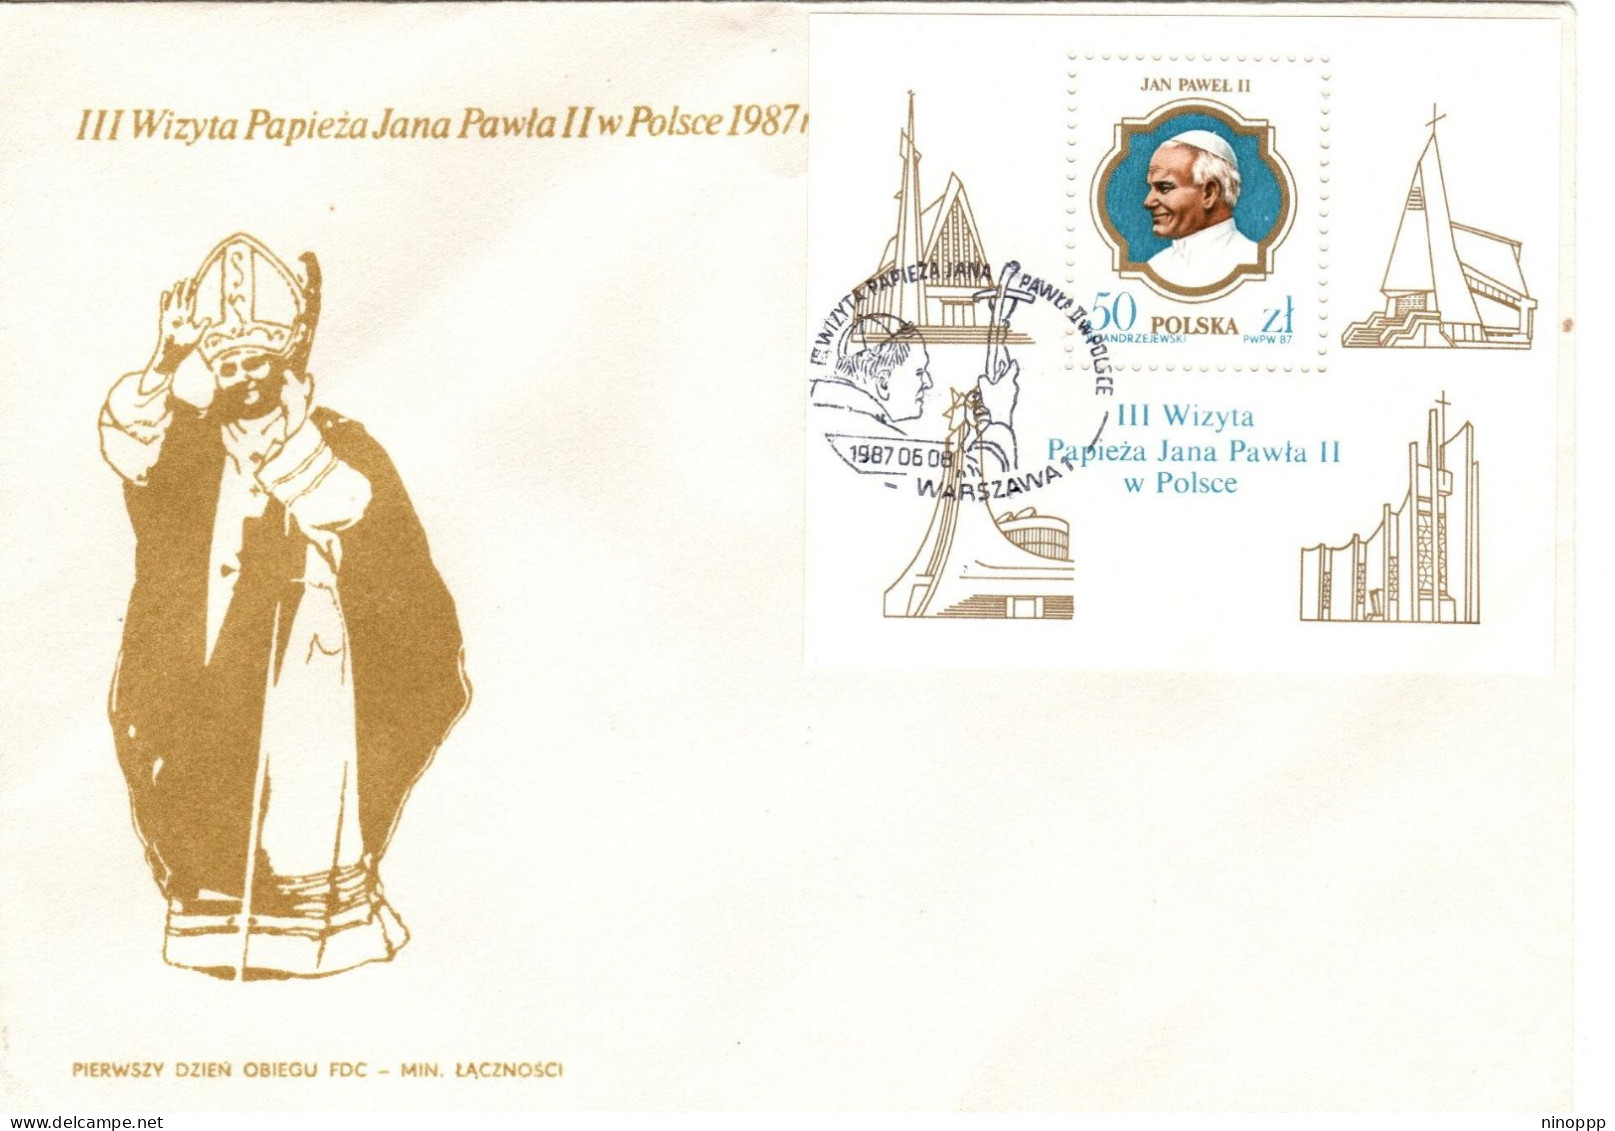 Poland 1987 State Visit Of Pope John Paul II Minisheet,First Day Cover - FDC